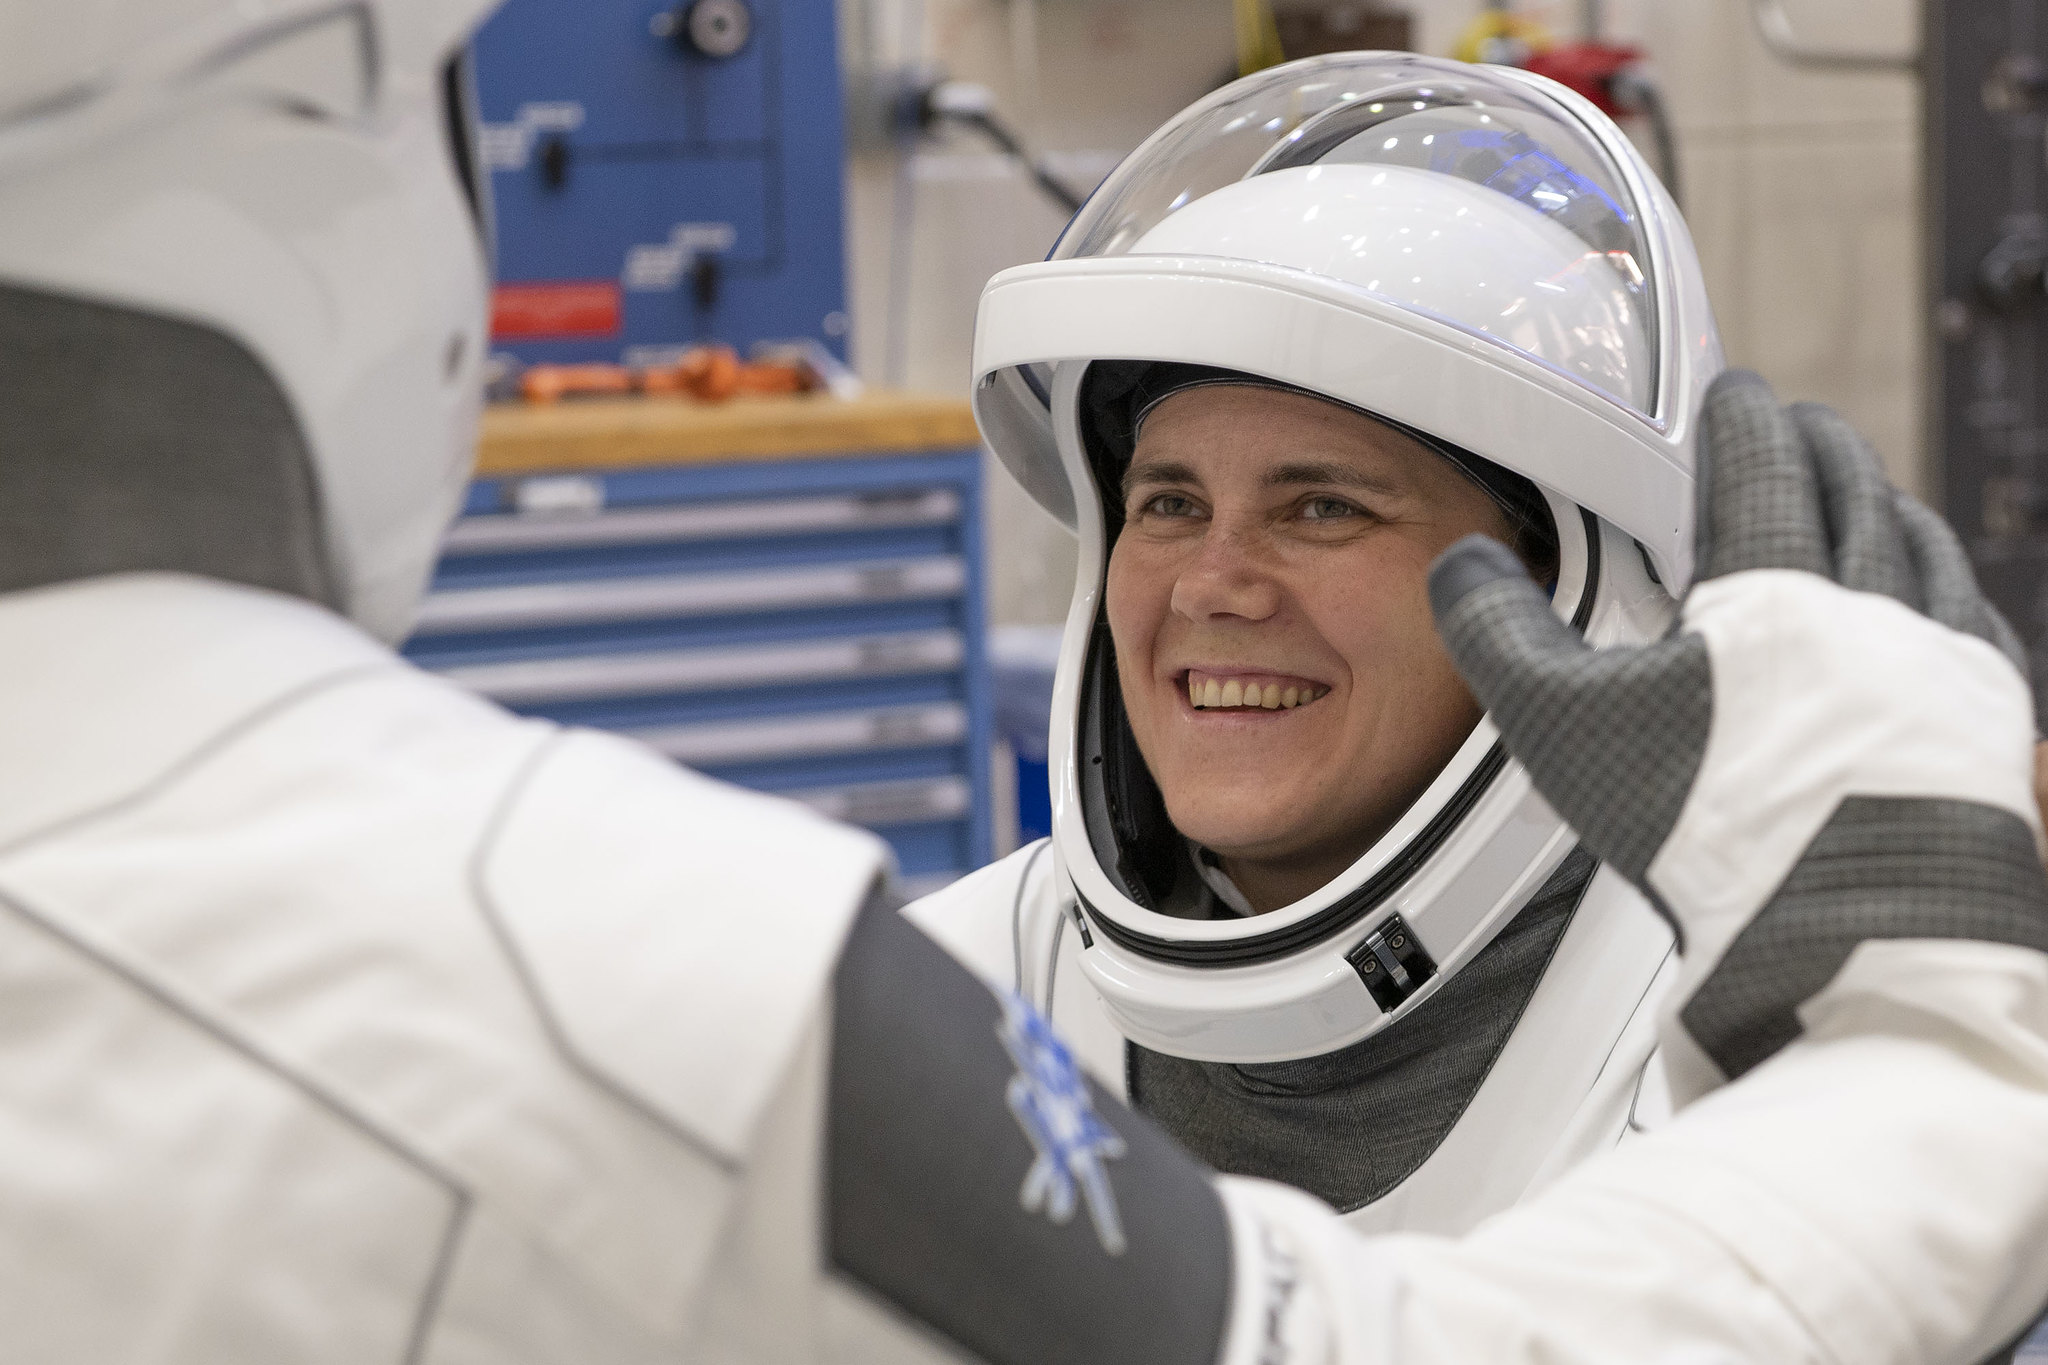 astronaut in white suit smiling, with another astronaut in white suit in front with the back showing